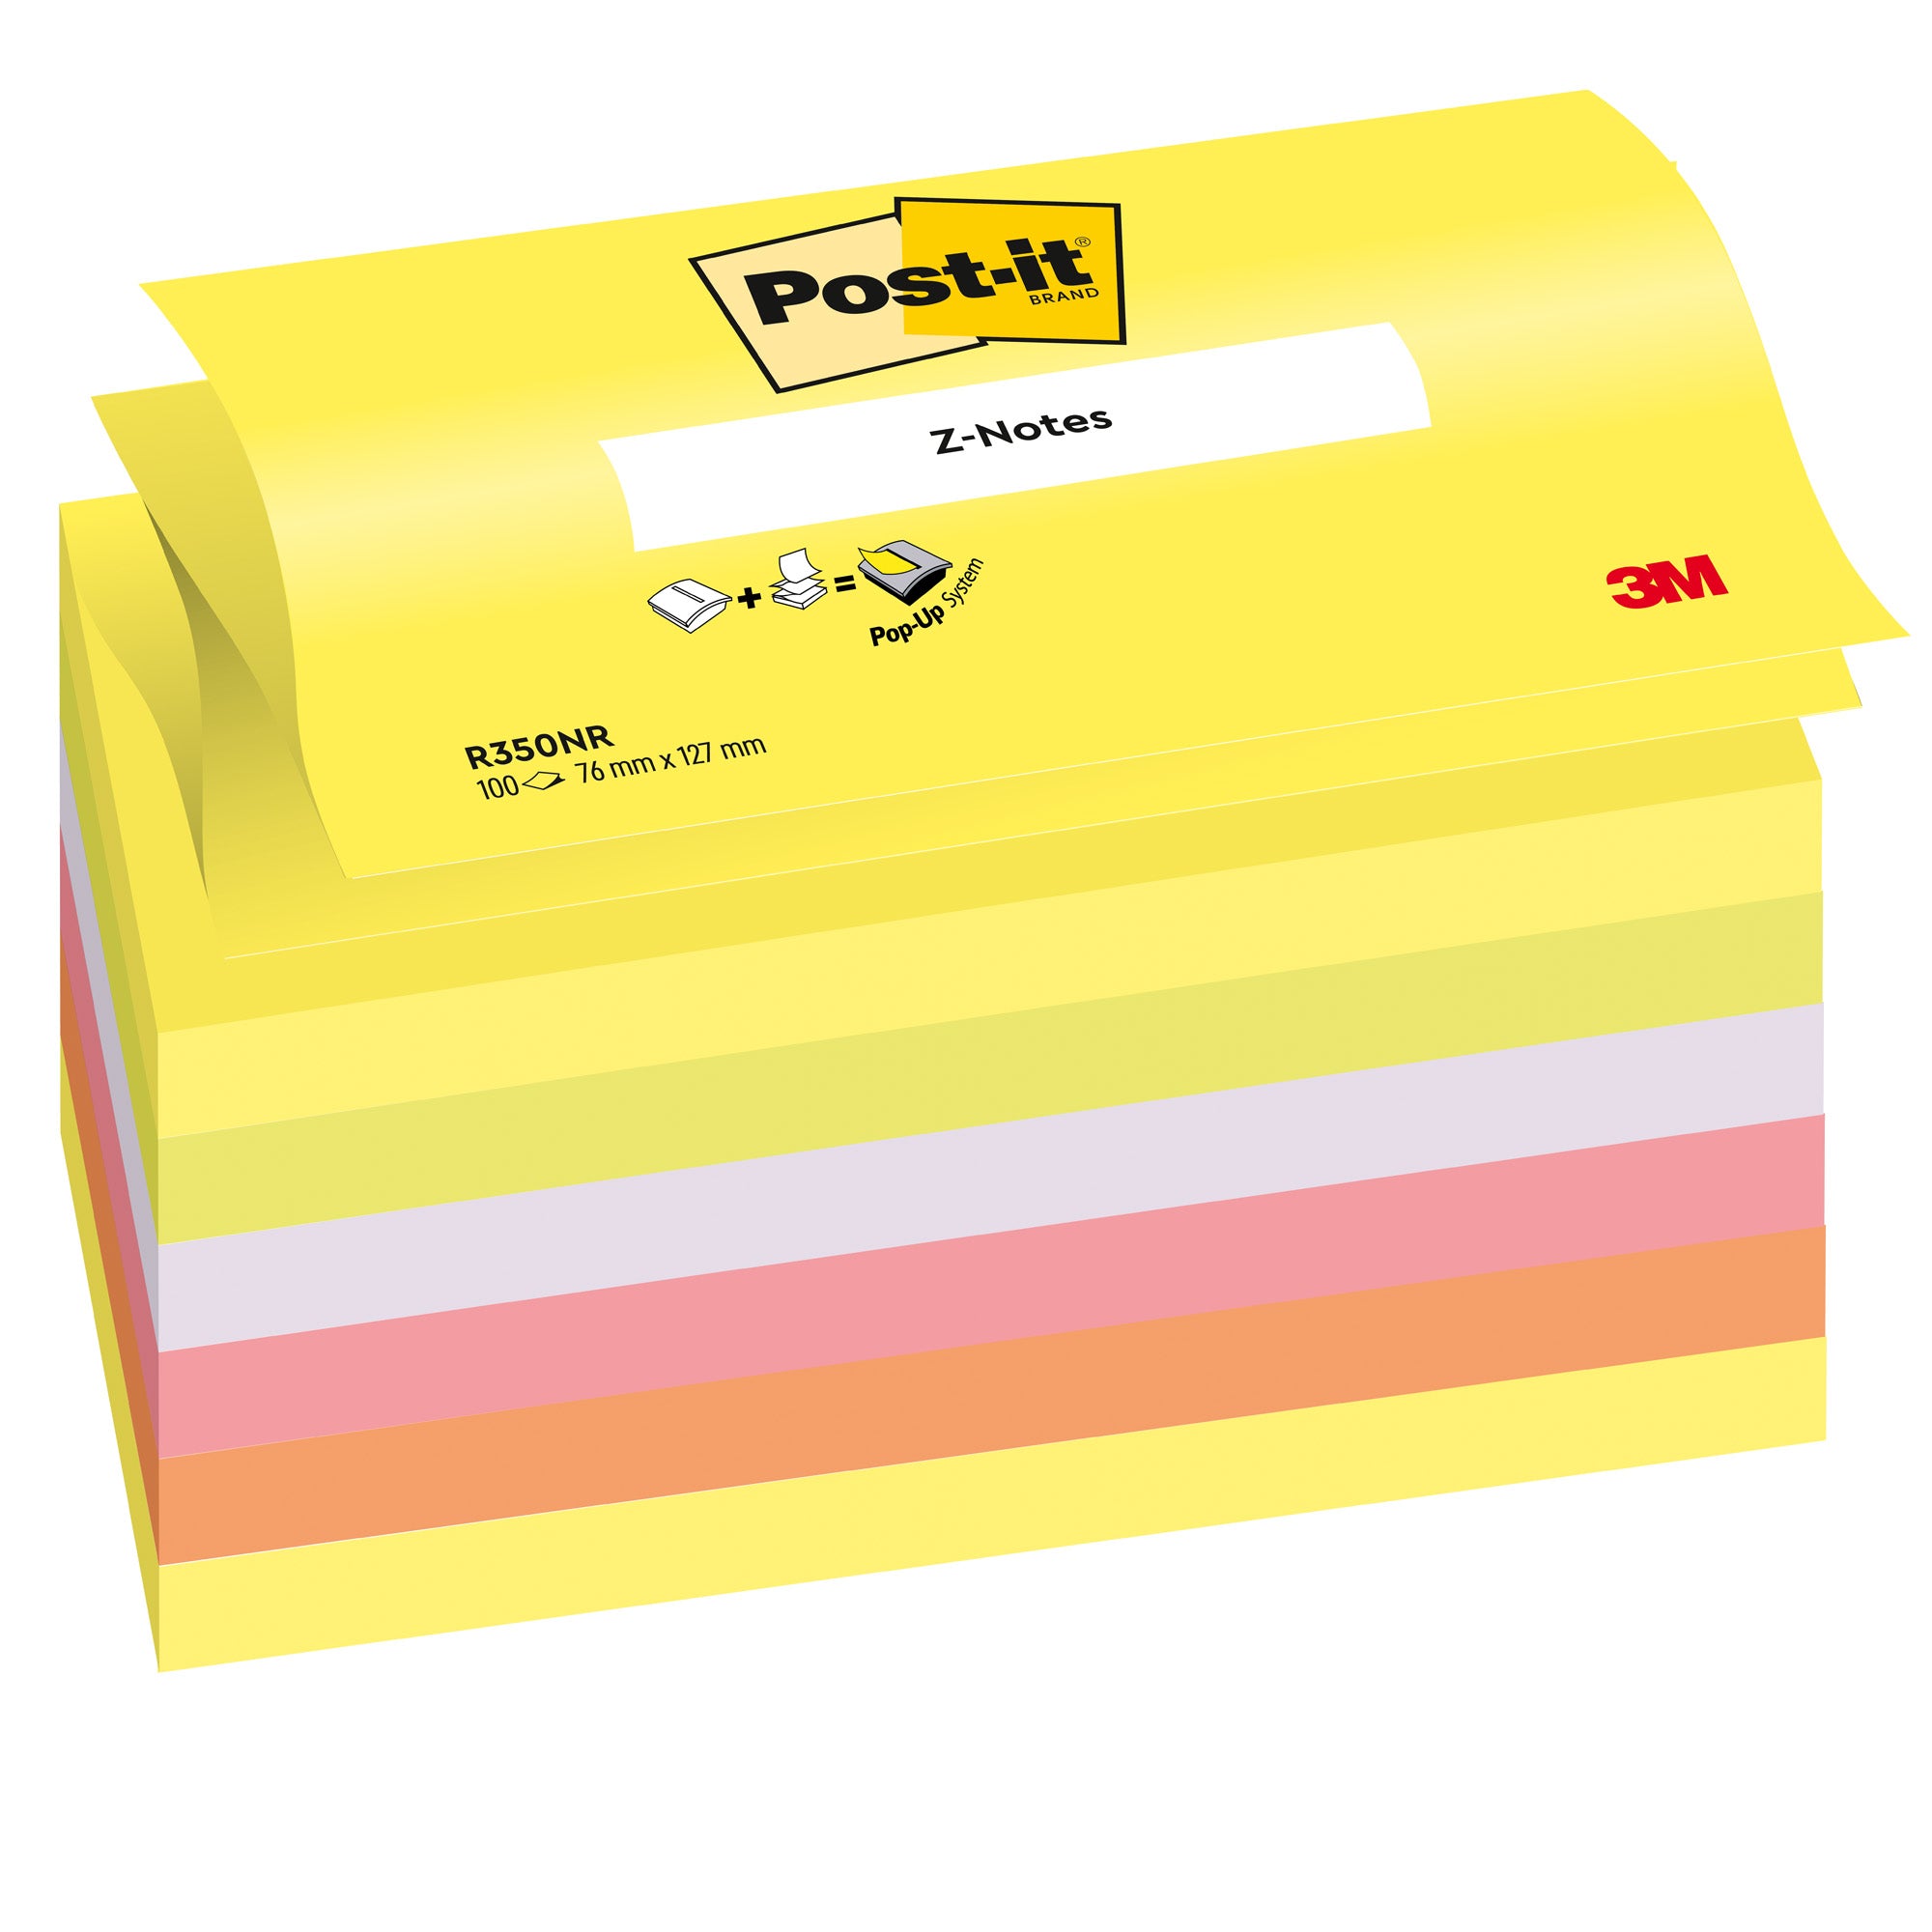 post-it-blocco-super-sticky-z-notes-76x127mm-100fg-r350nr-assort-neon